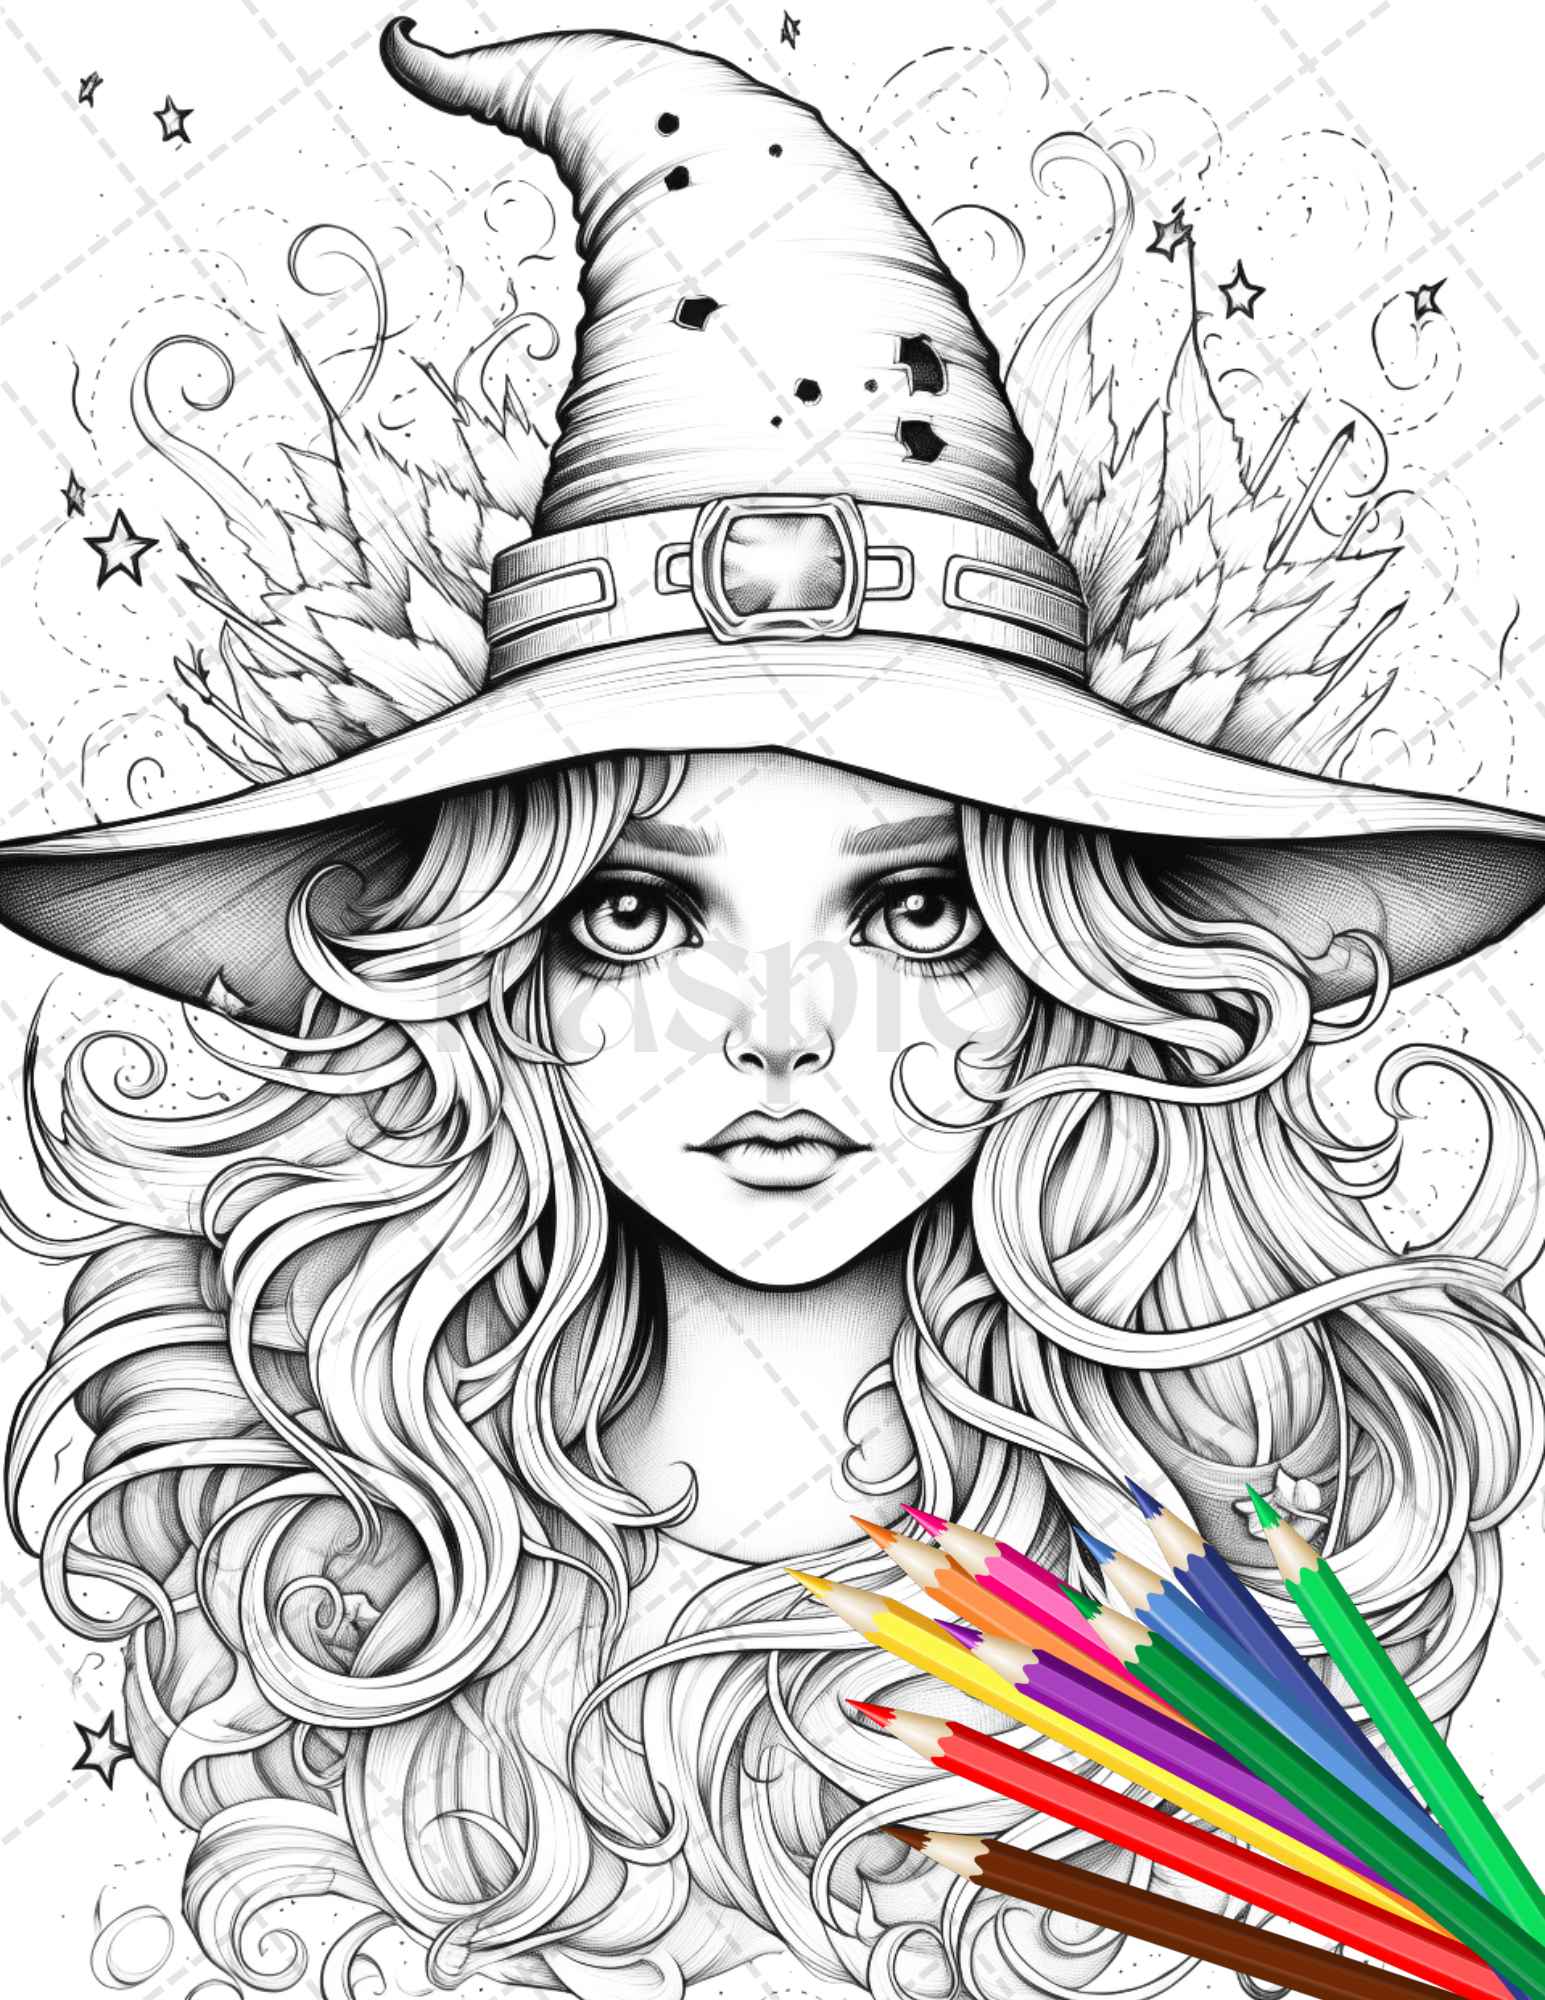 Cute witches coloring pages printable for adults grayscale colorin â coloring